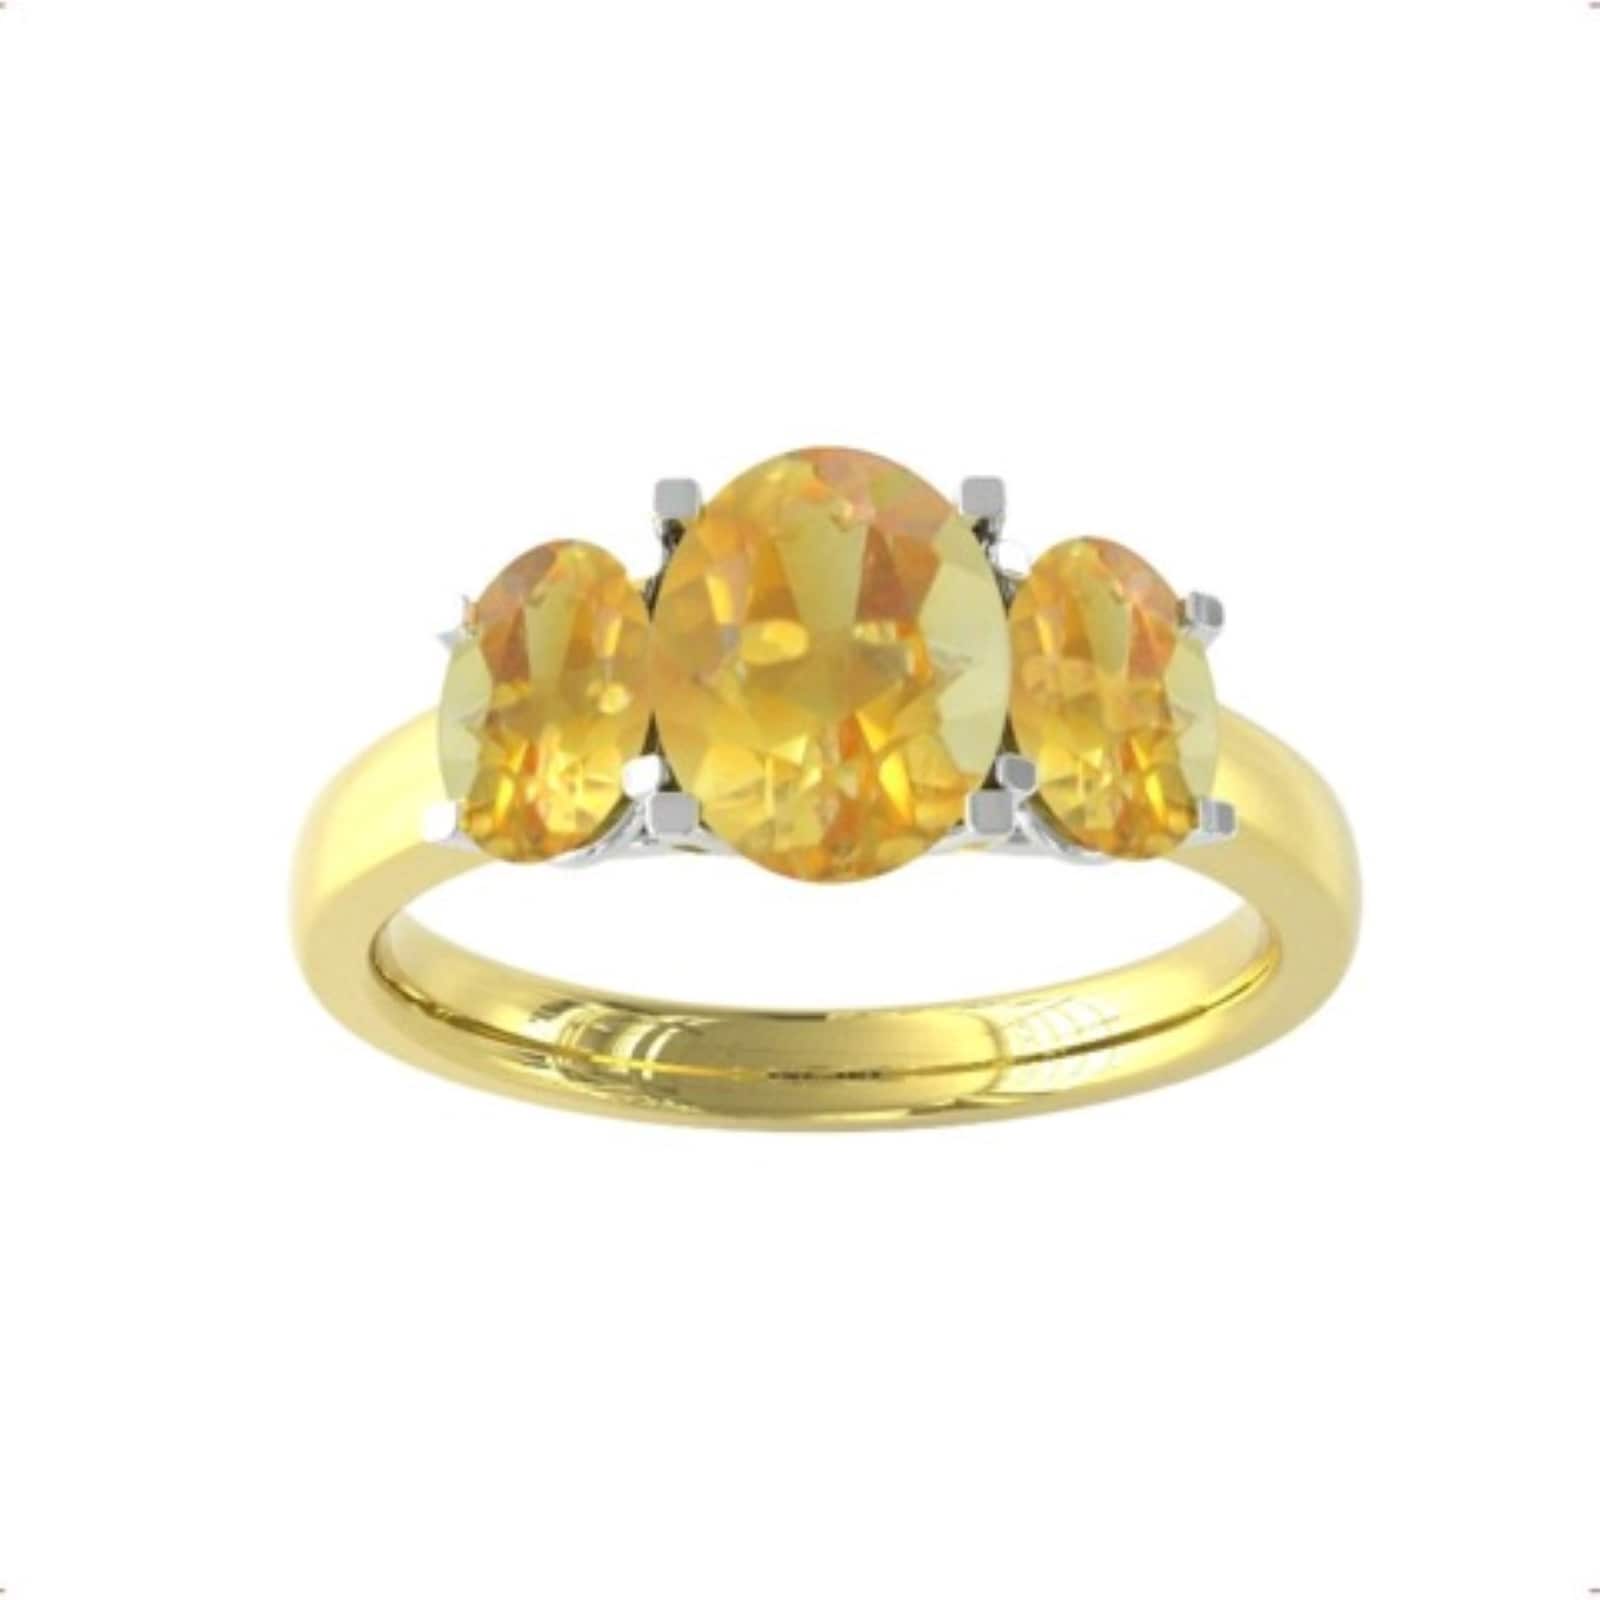 9ct Yellow and White Gold 3 Stone Citrine Ring - Ring Size S.5